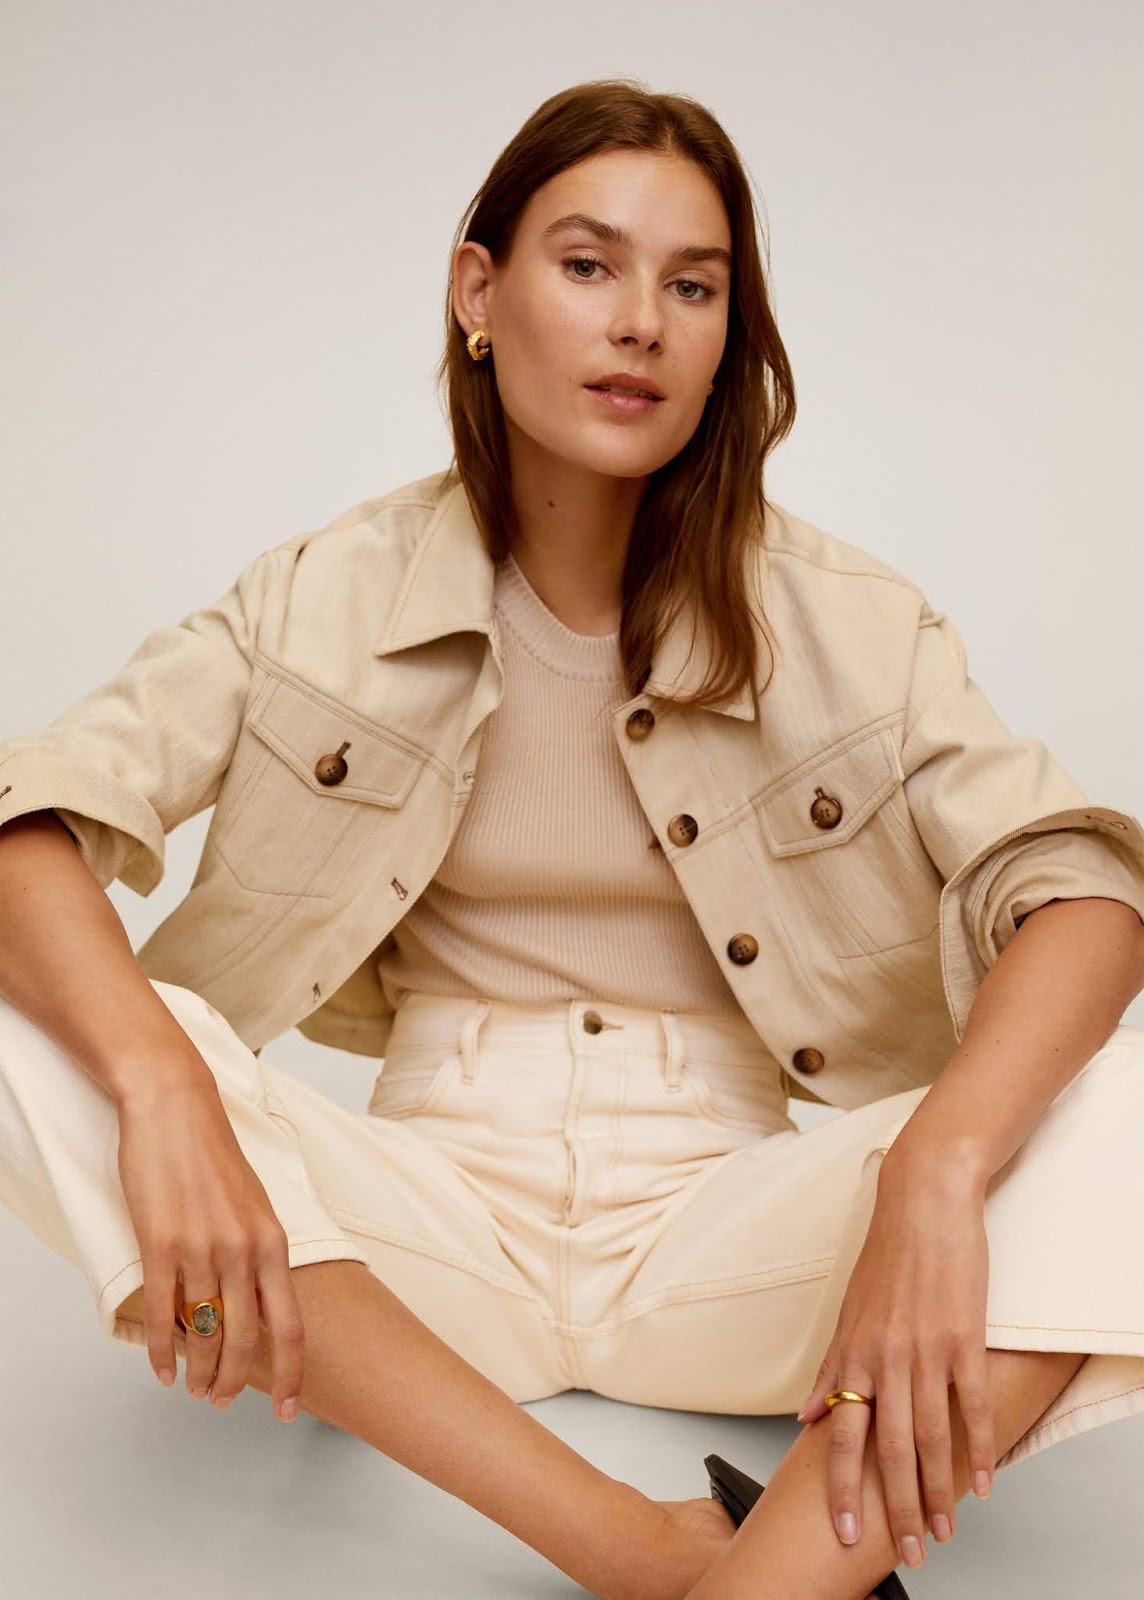 Mango Sale — Neutral Denim Jacket, Ribbed Top and High-Waisted Beige Jeans